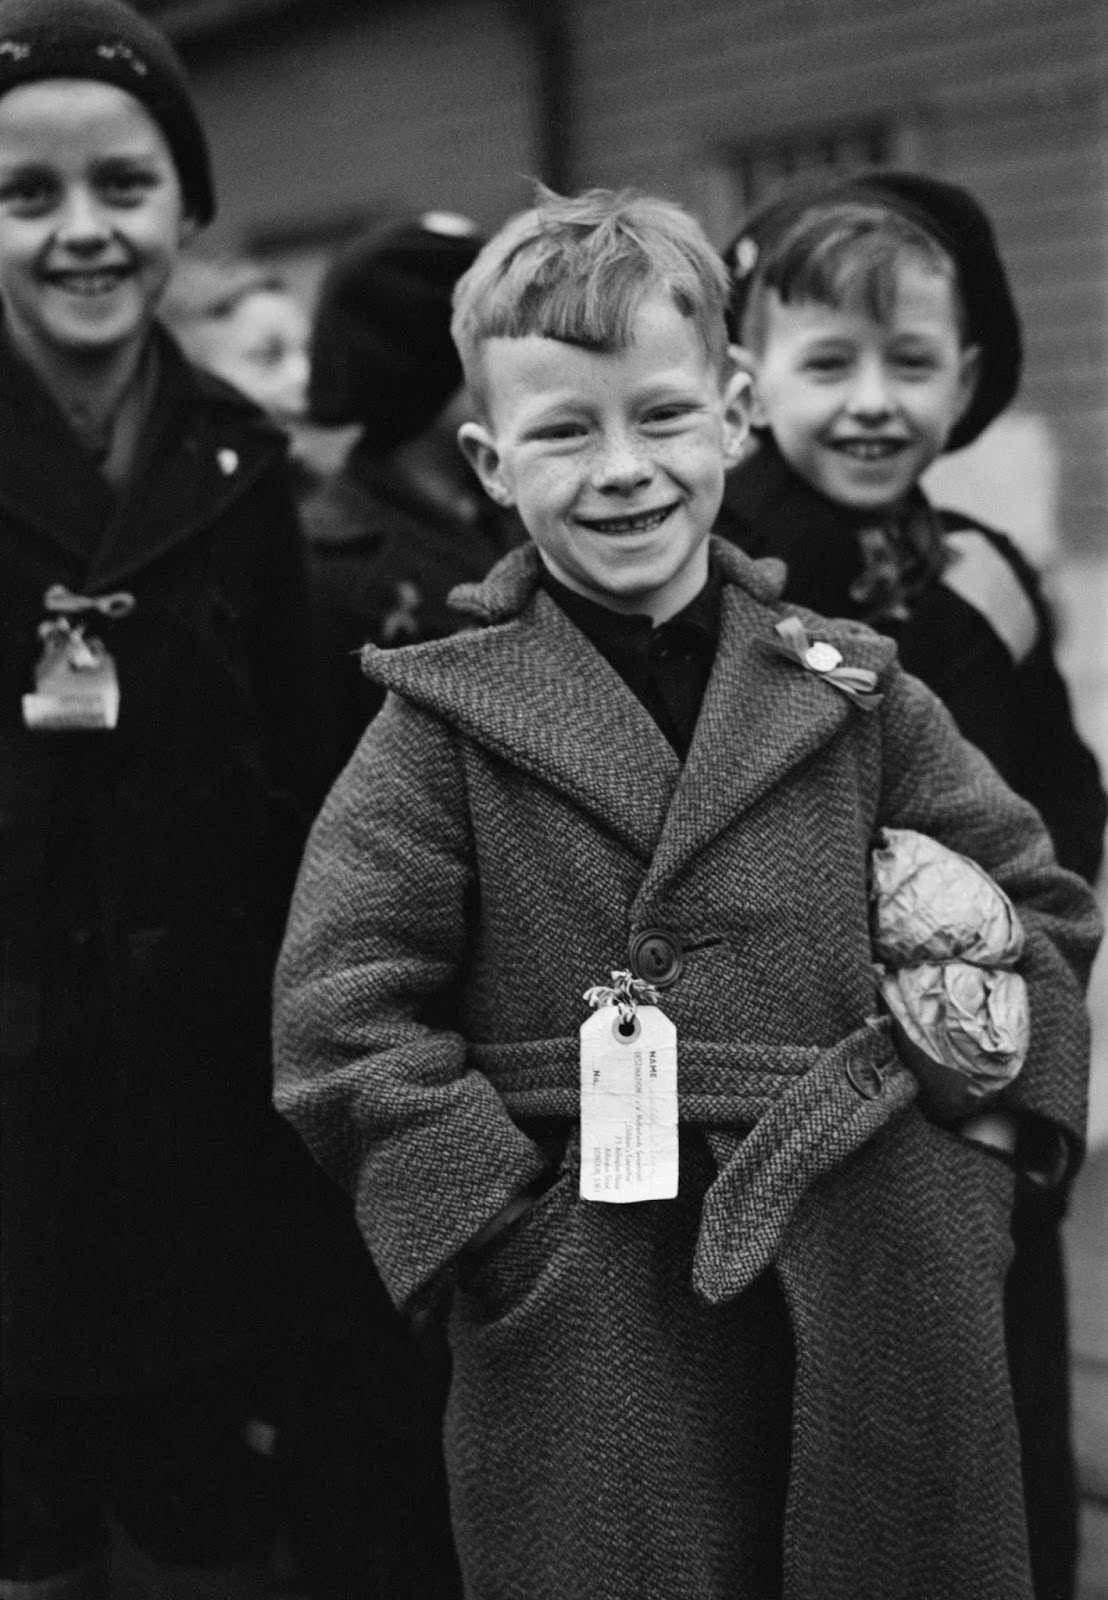 Dutch child refugees arrival In Britain at Tilbury, Essex, on Mar. 11, 1945. The small paper parcel under the boy's arm contains all his luggage.